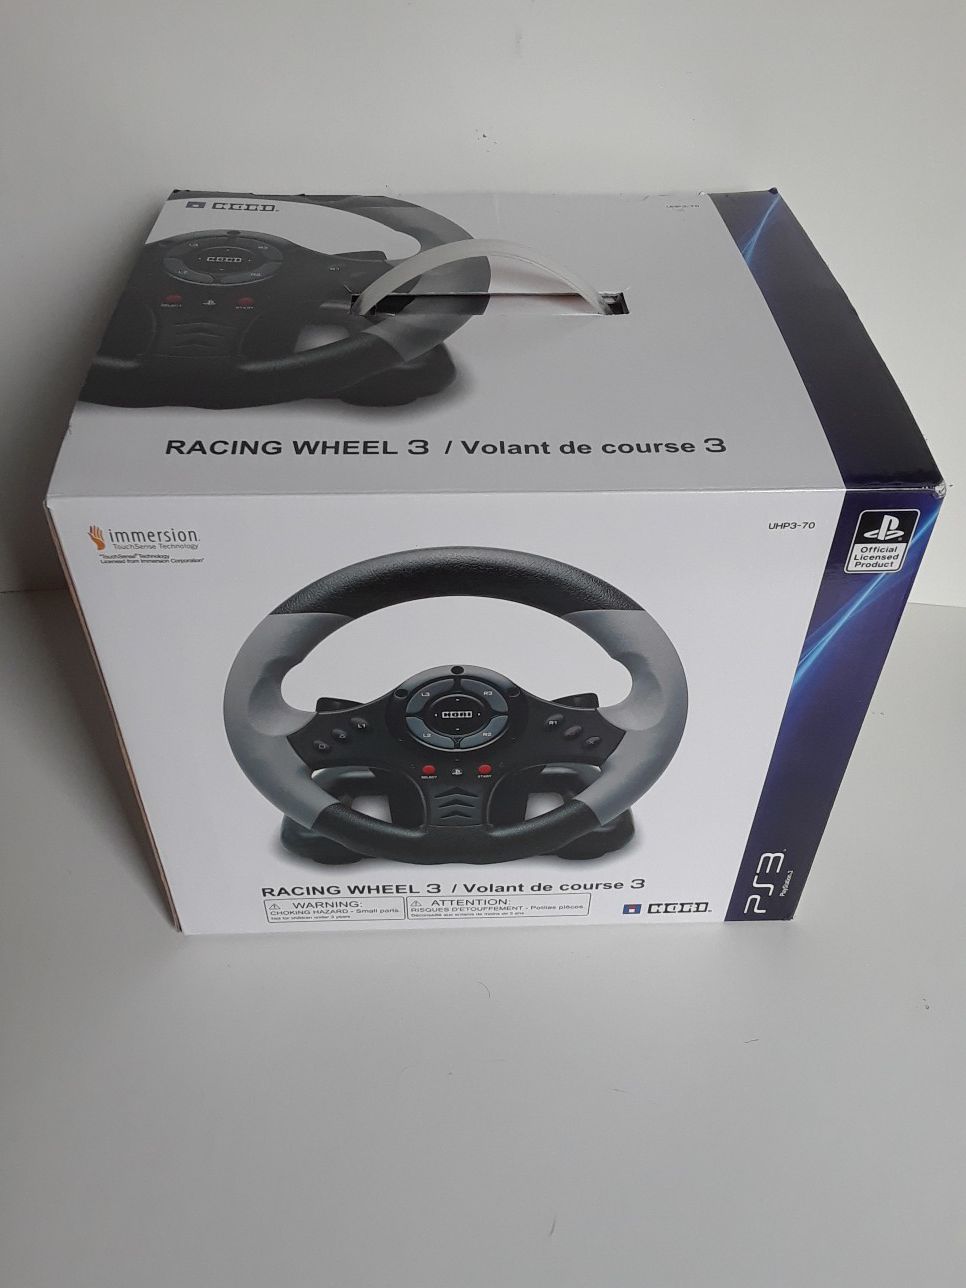 Hori Racing Wheel 3 with Foot Pedals for Playstation 3 PS3 UHP3-70 In Box